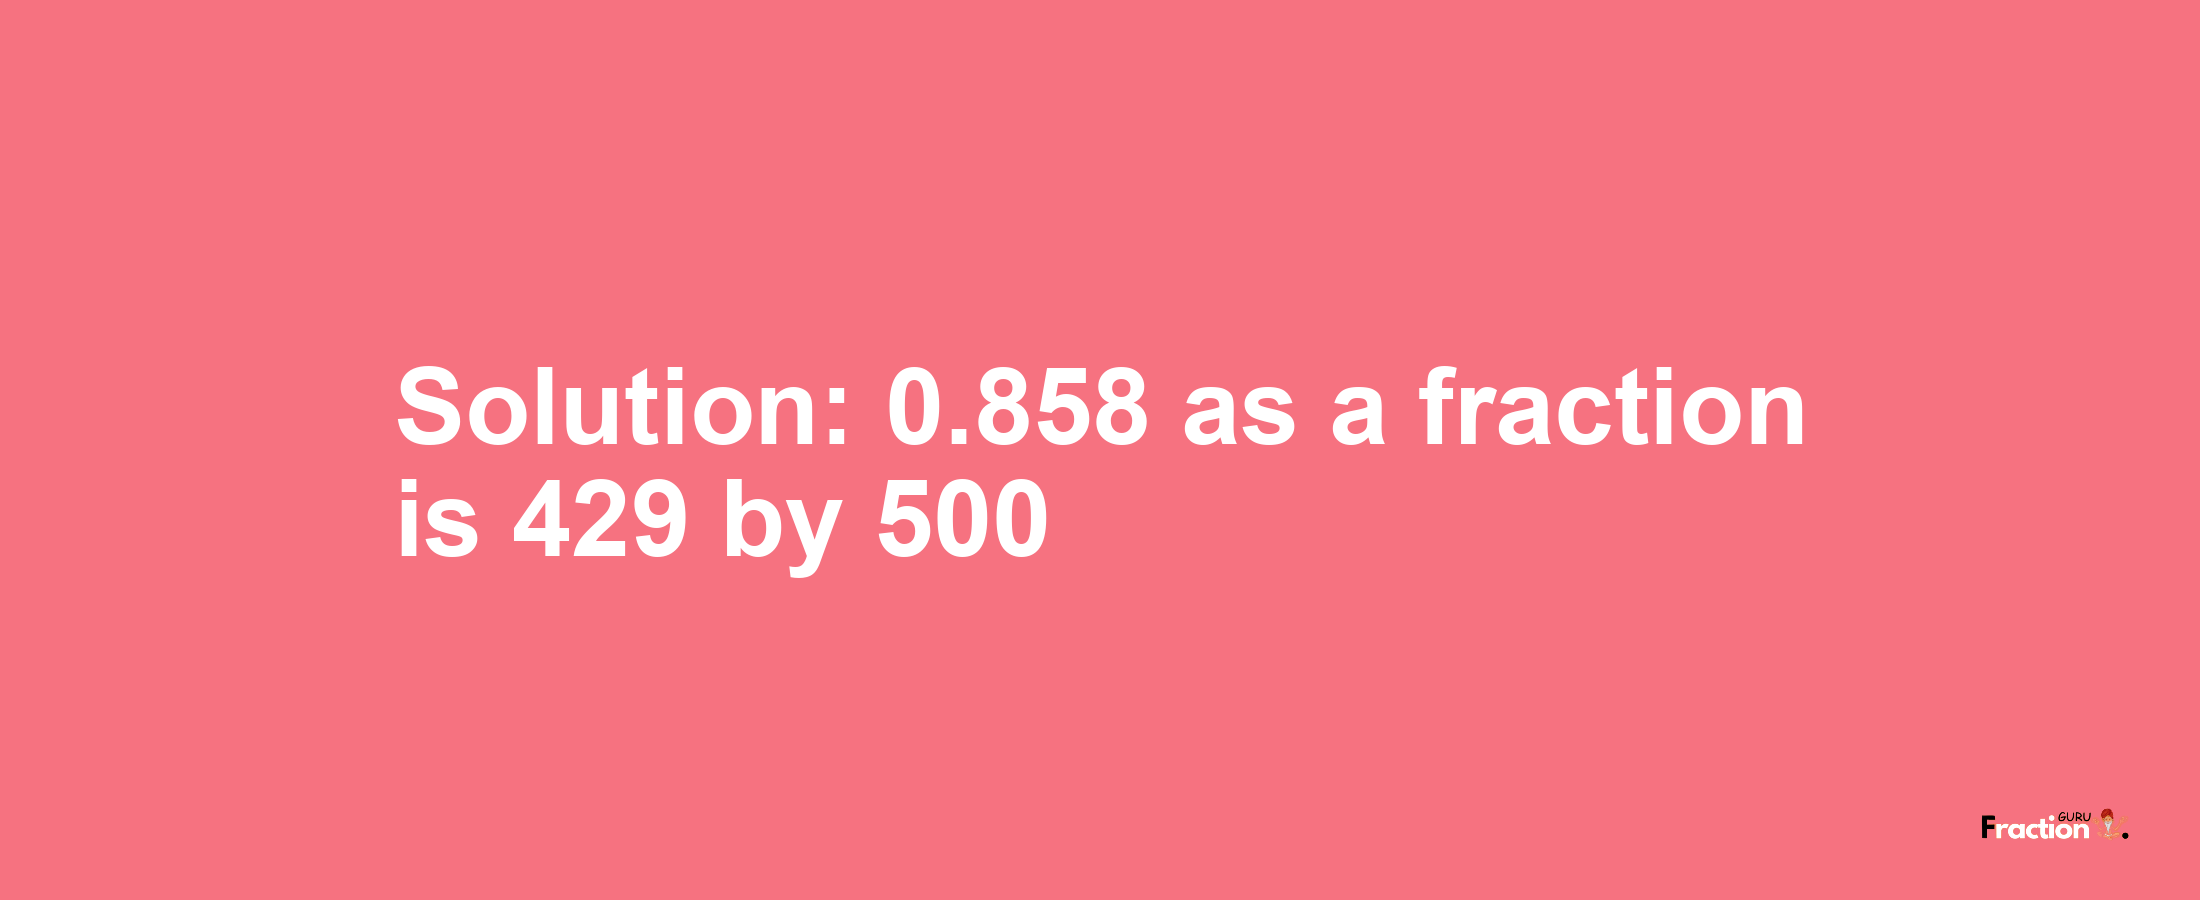 Solution:0.858 as a fraction is 429/500